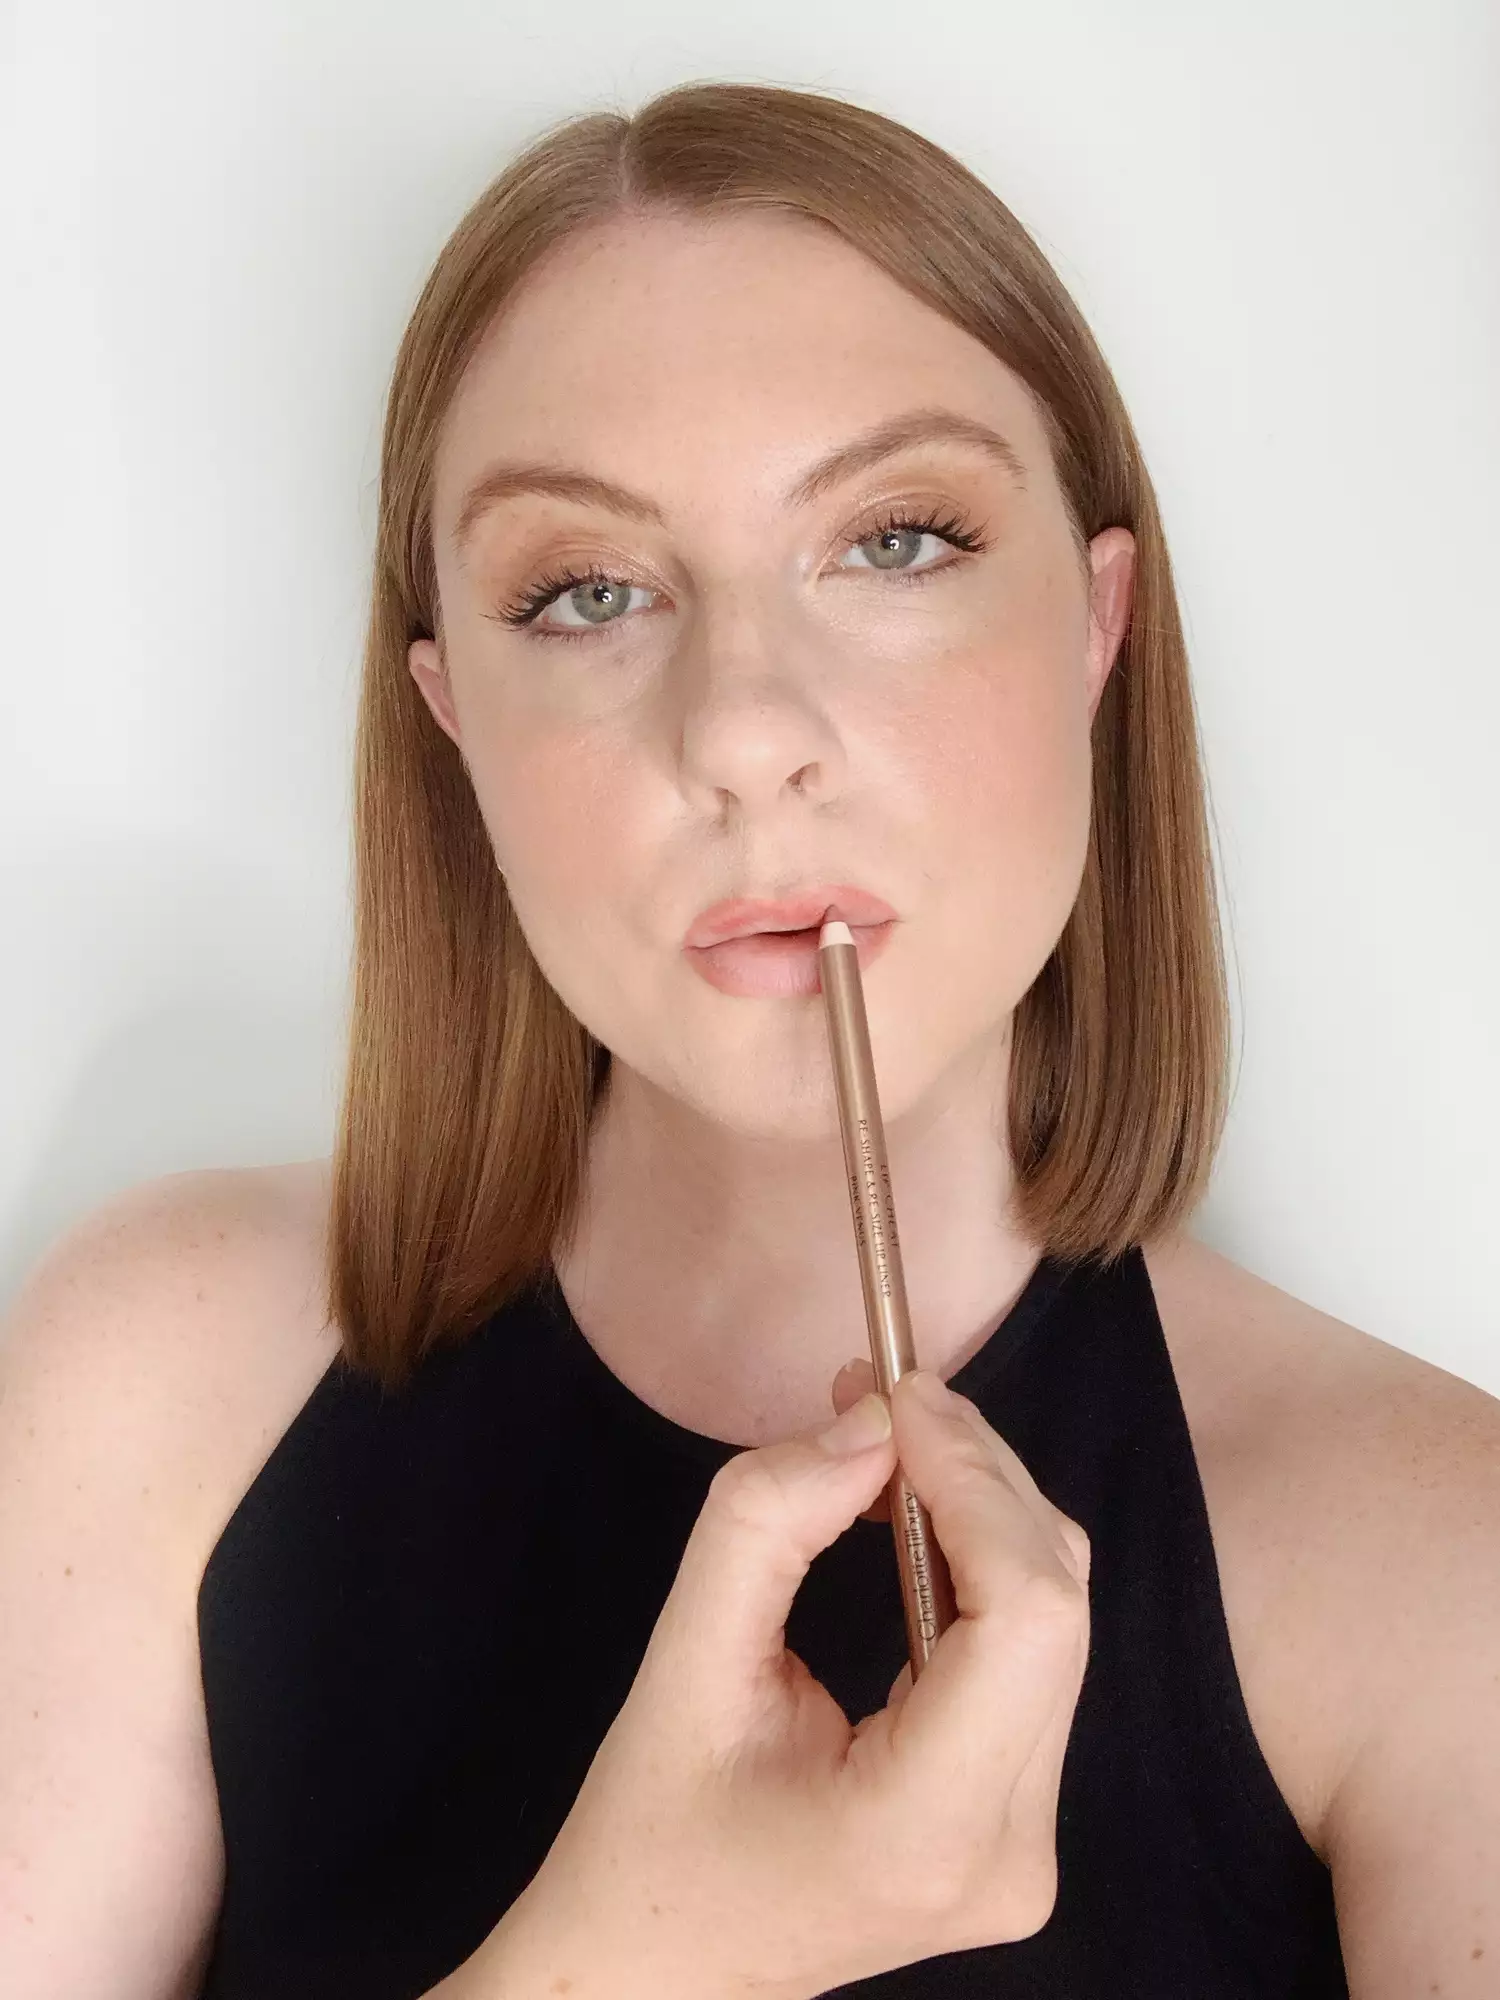 Ashley Rebecca creating fuller lips with lipliner pencil